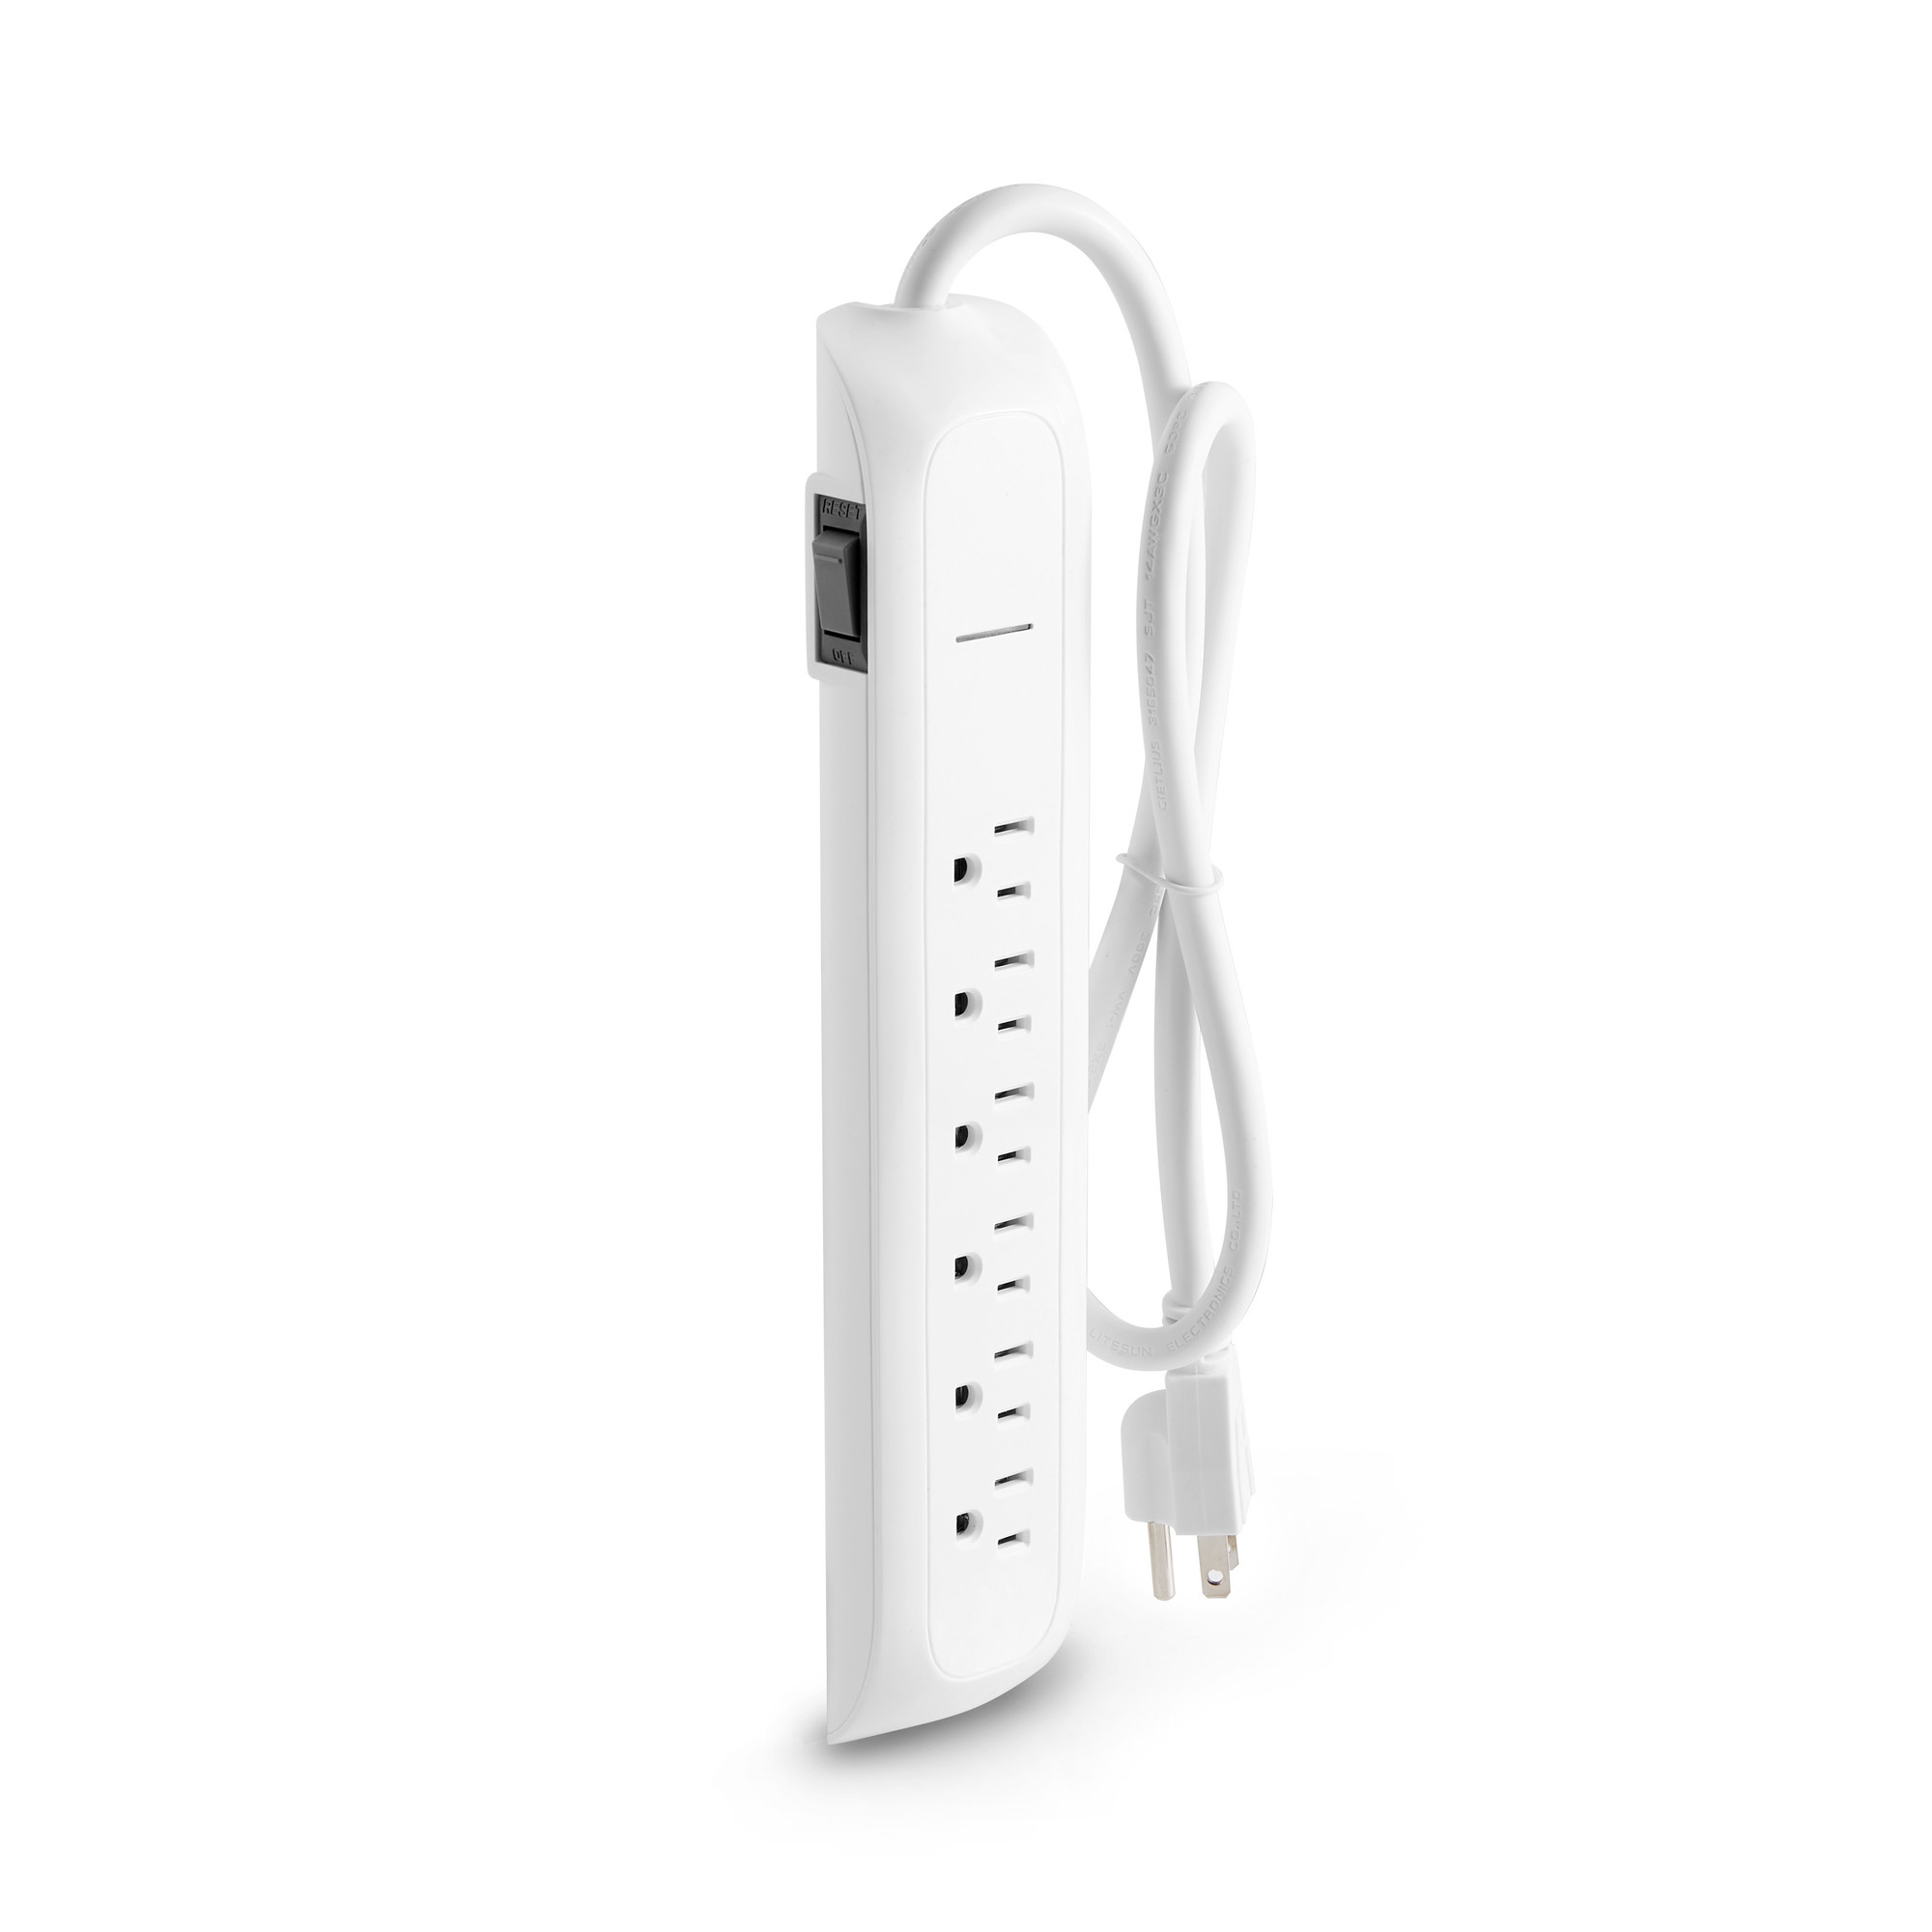 6-Outlet Power Strip, 6' Cord